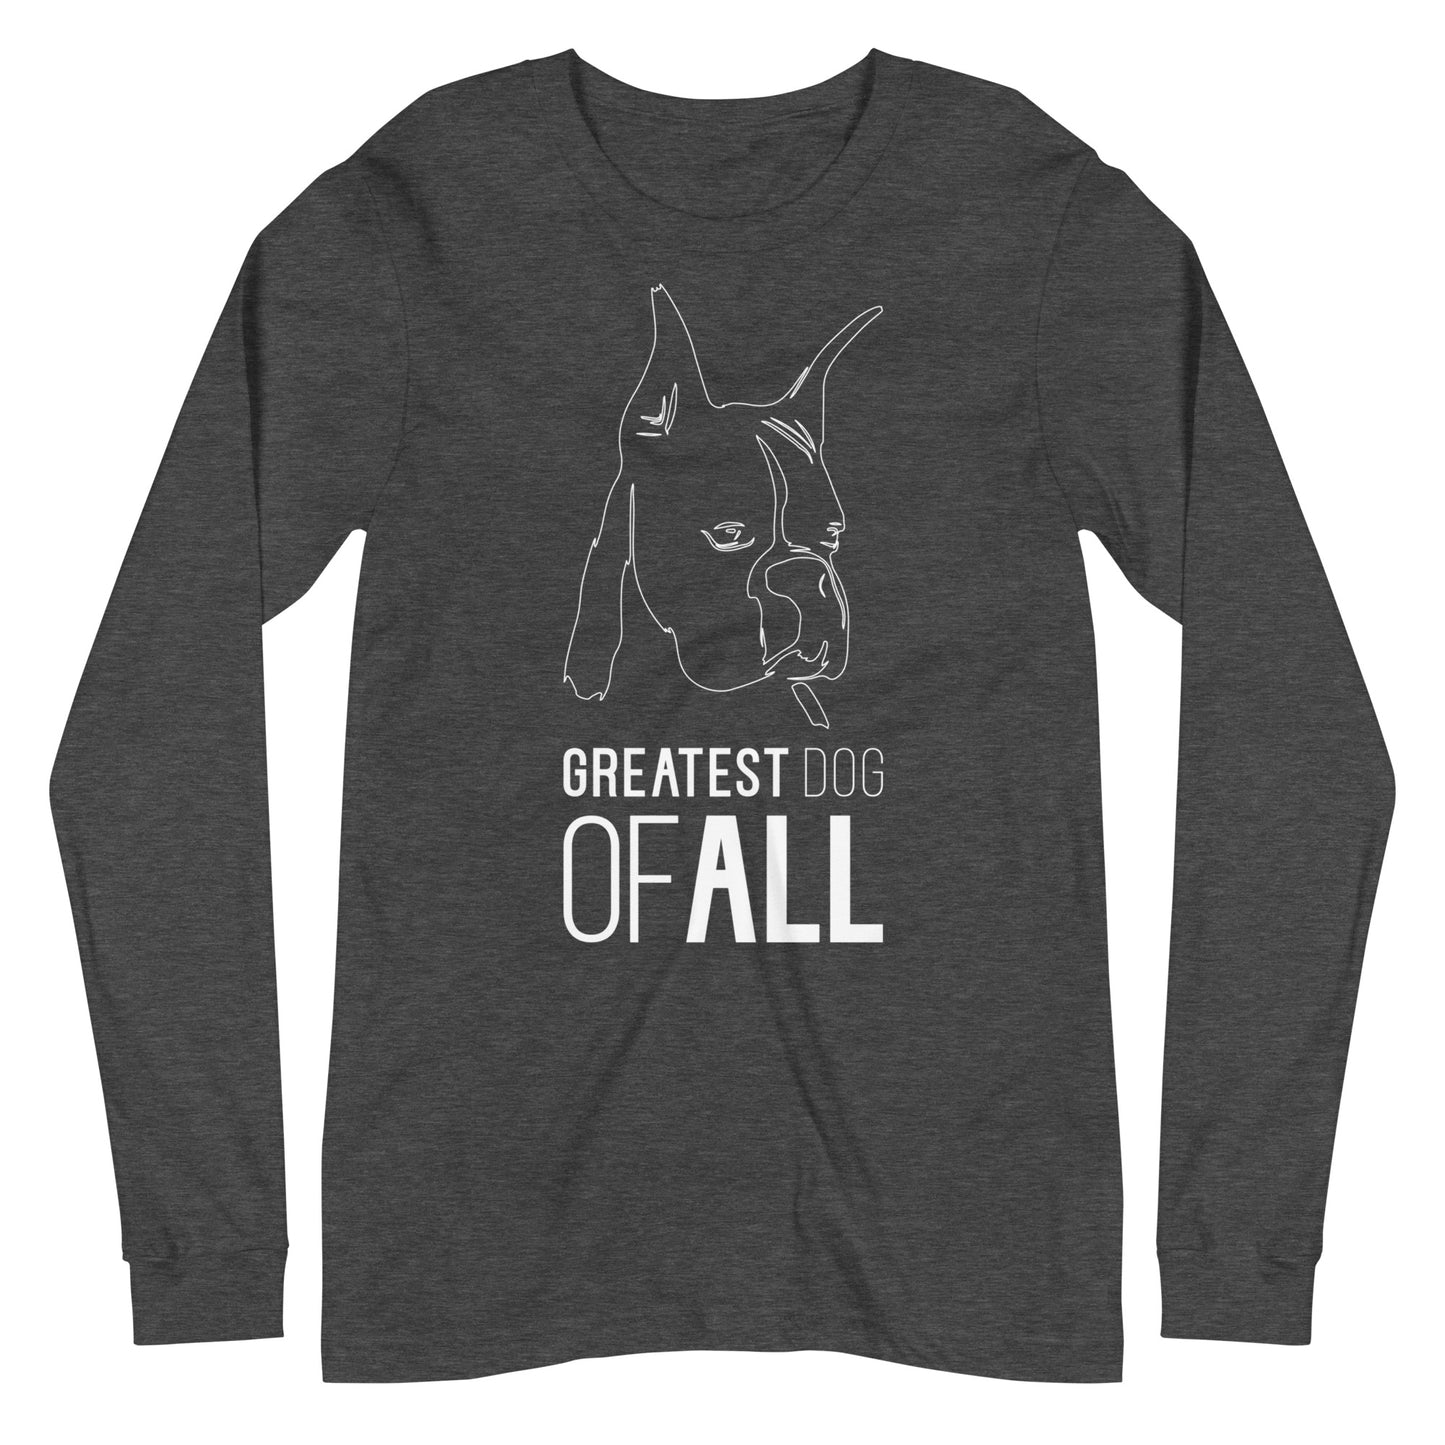 White line Boxer face with Greatest Dog of All caption on unisex dark grey heather long sleeve t-shirt